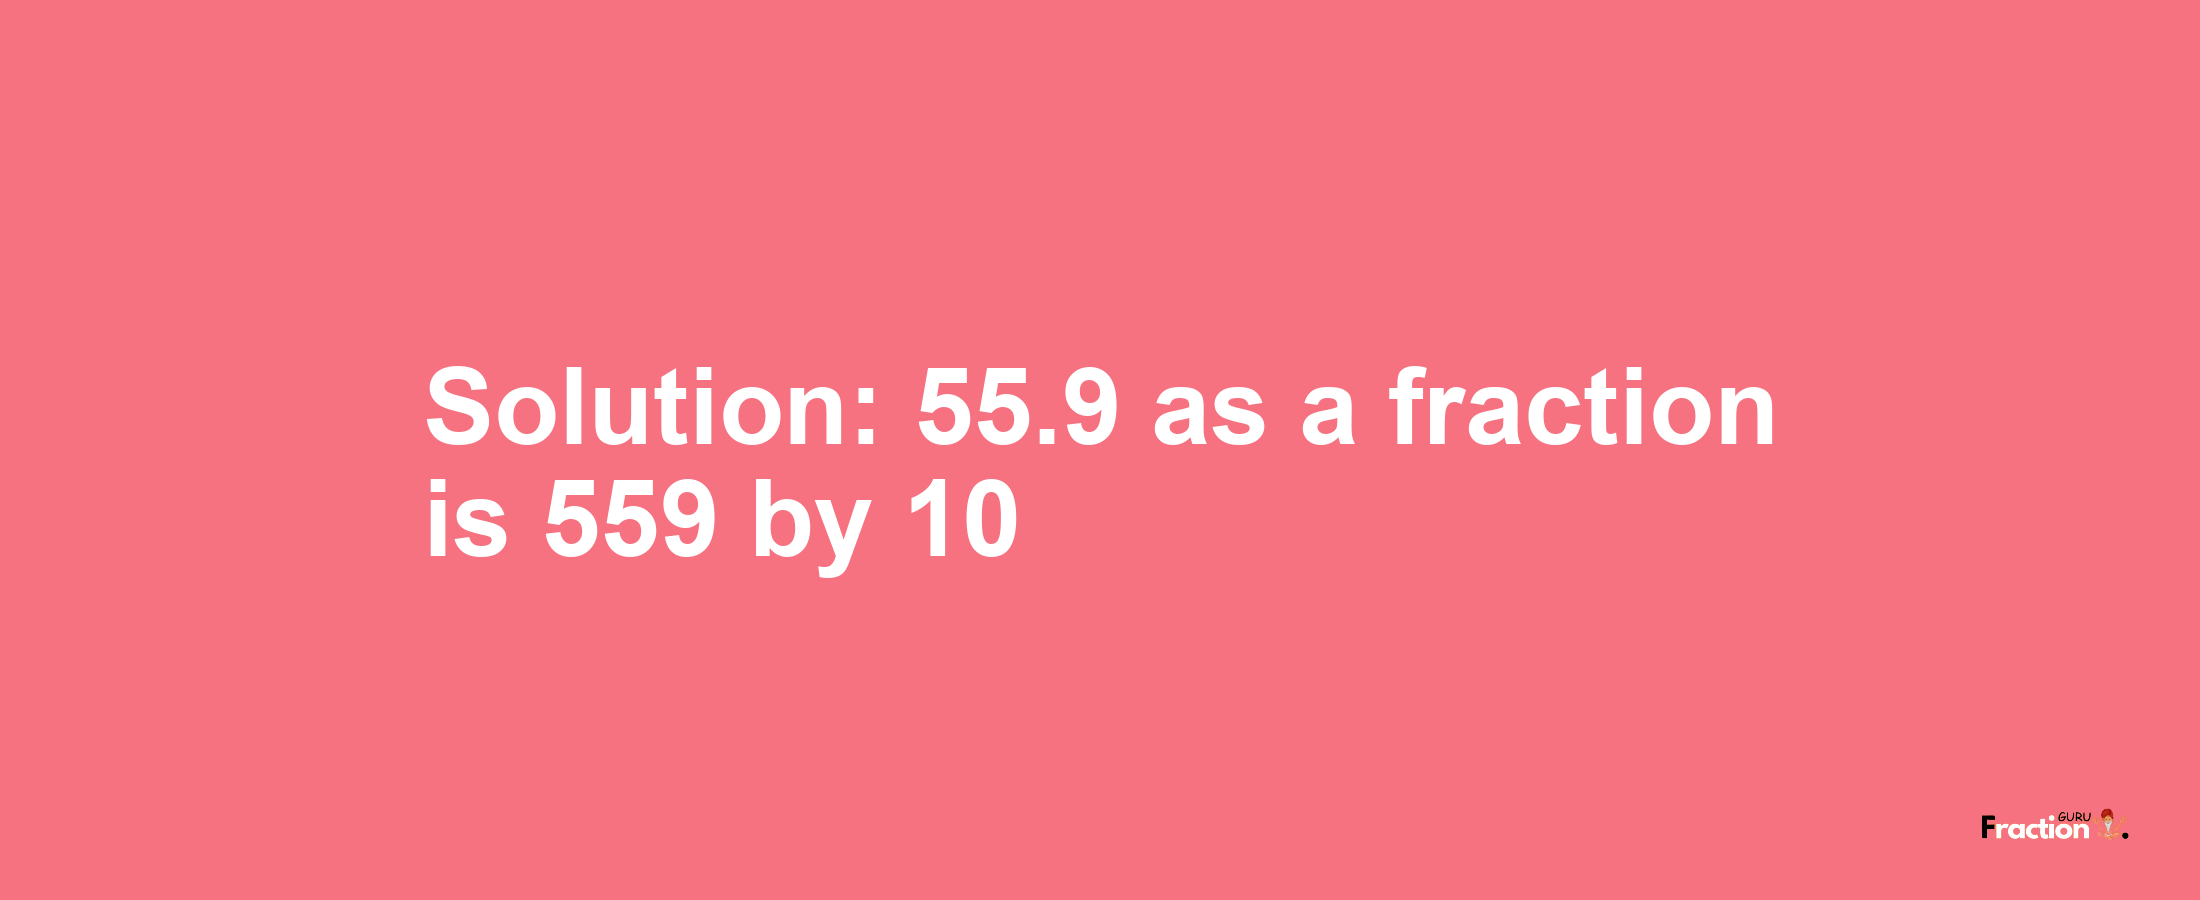 Solution:55.9 as a fraction is 559/10